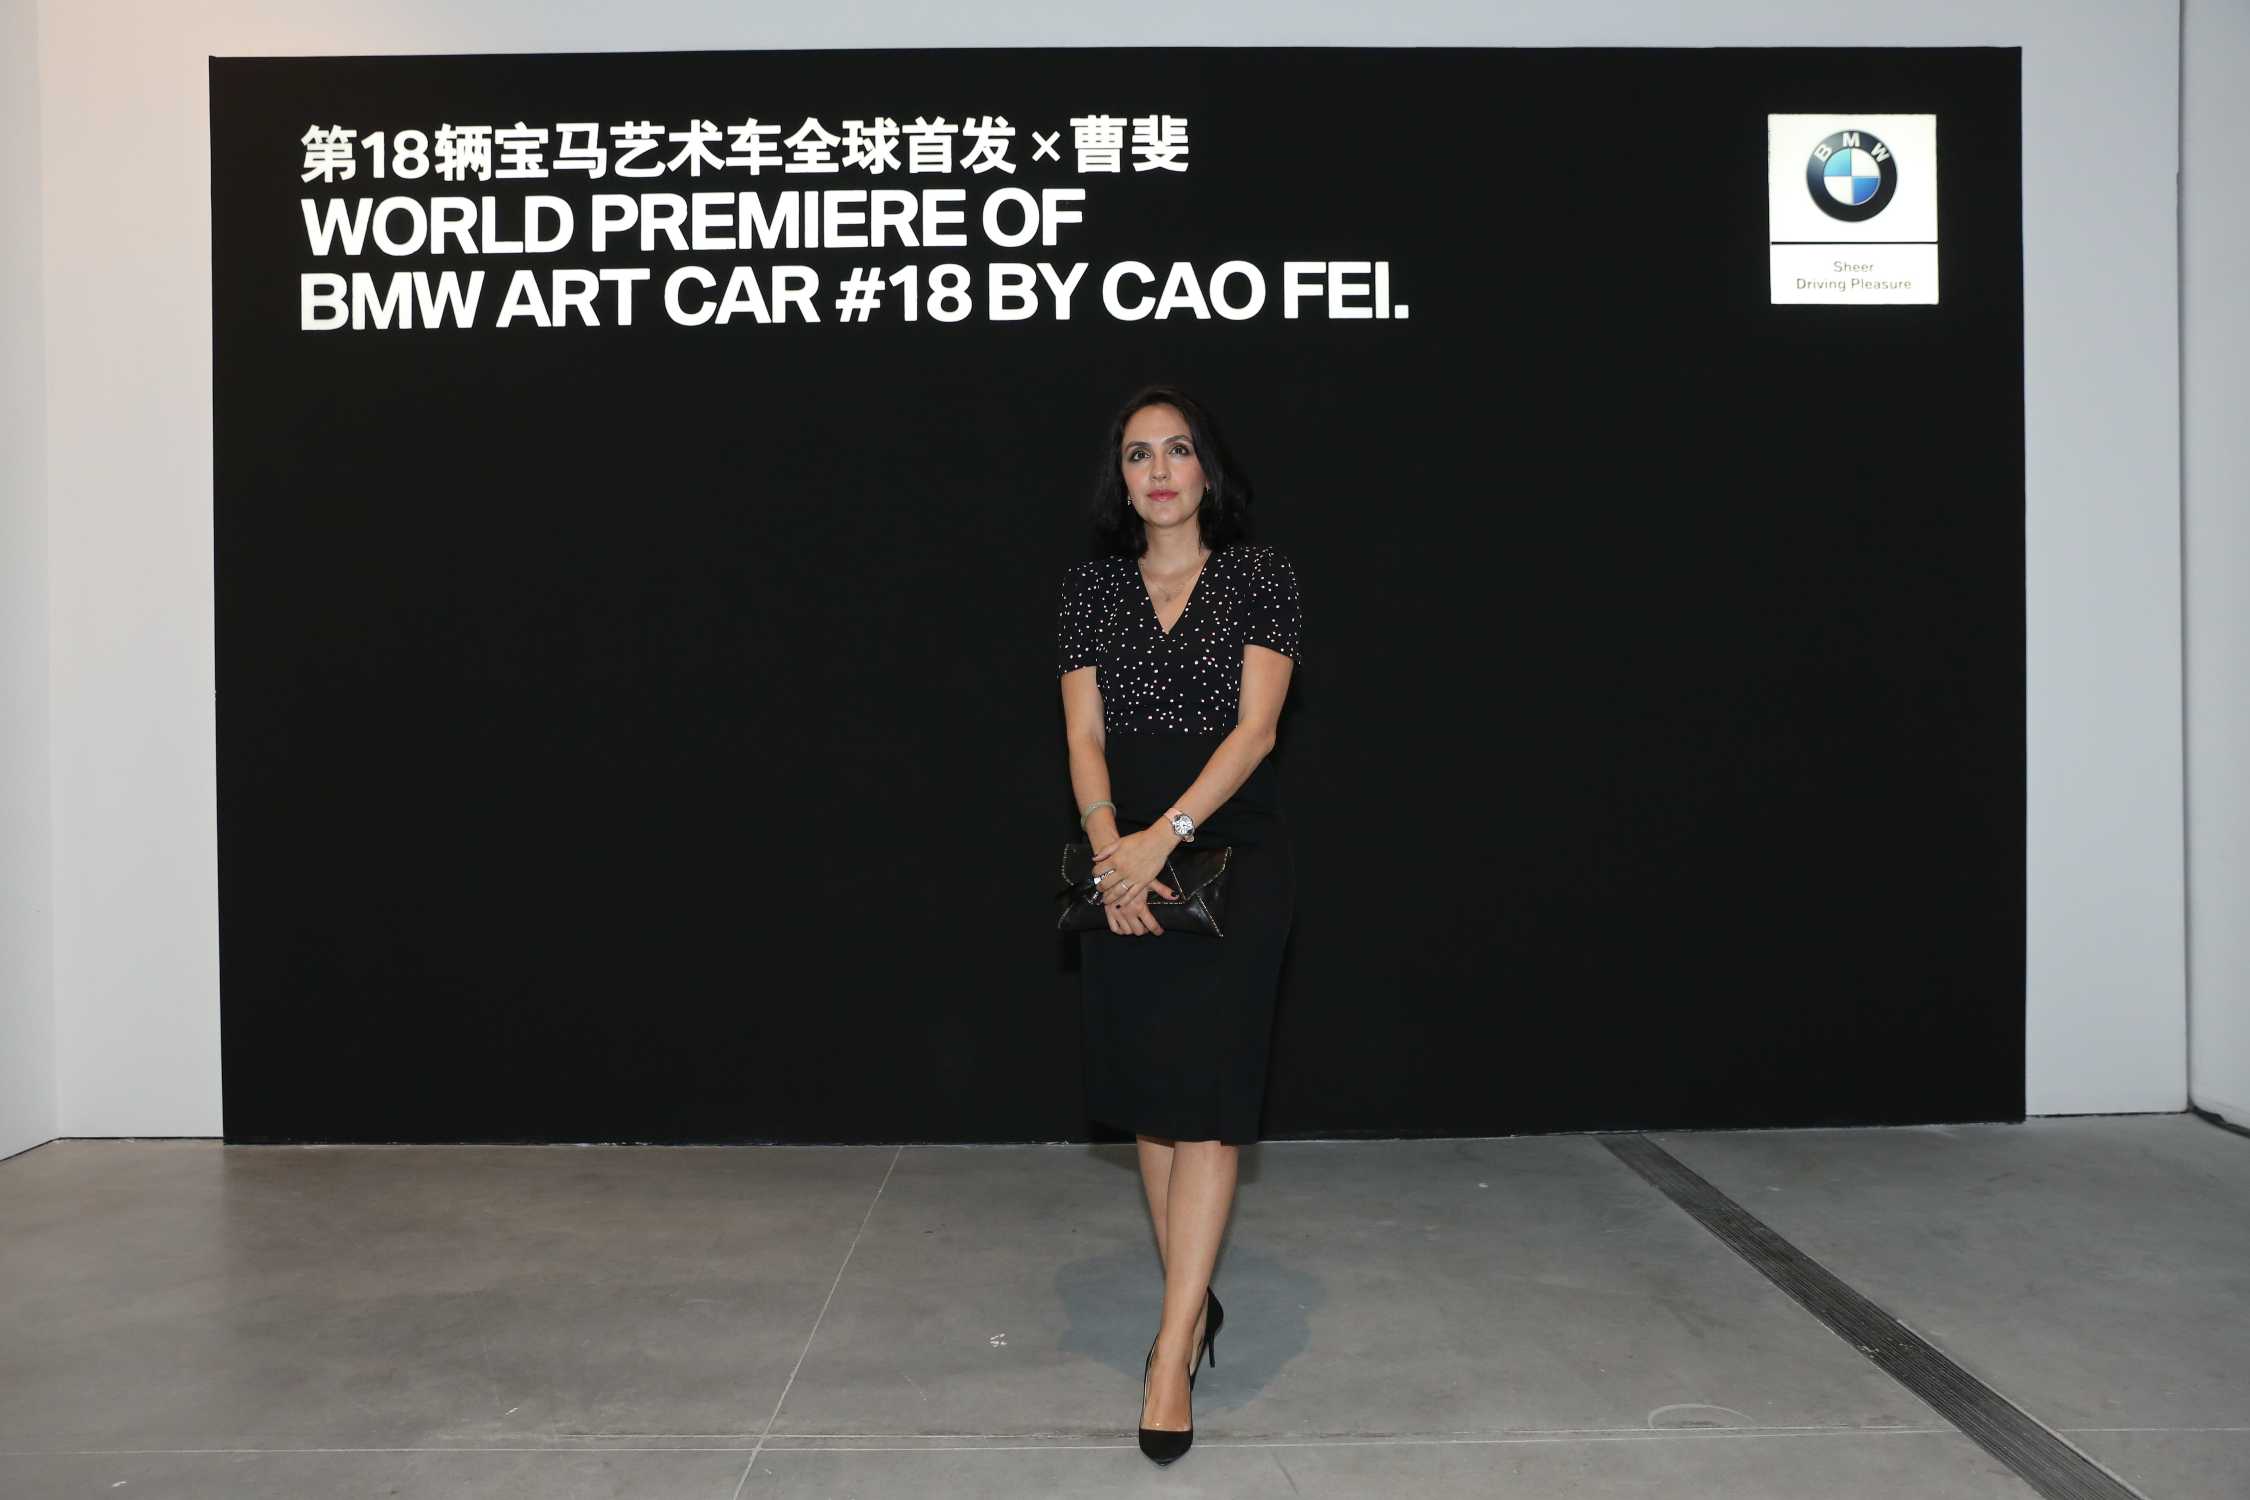 World Premiere Bmw Art Car 18 By Cao Fei Minsheng Art Museum Beijing 31 May 17 Anais Martane Photographer And Spouse Of Actor Liu Ye C Bmw Ag